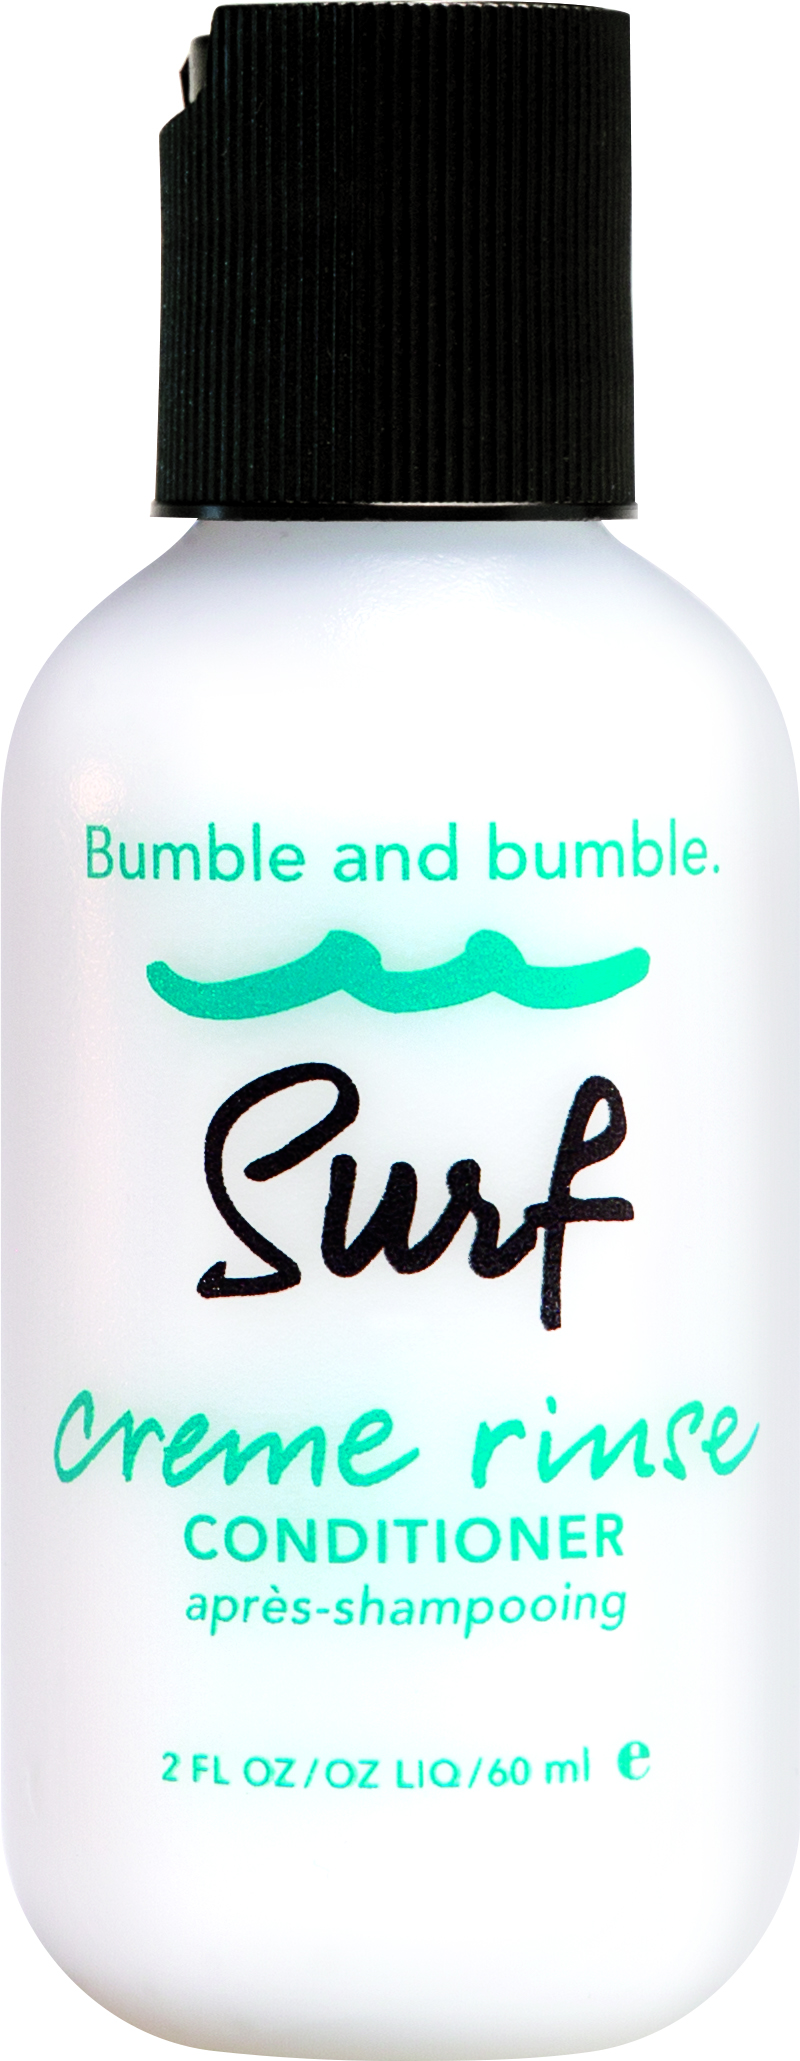 Bumble and bumble Surf Creme Rinse Conditioner 60ml